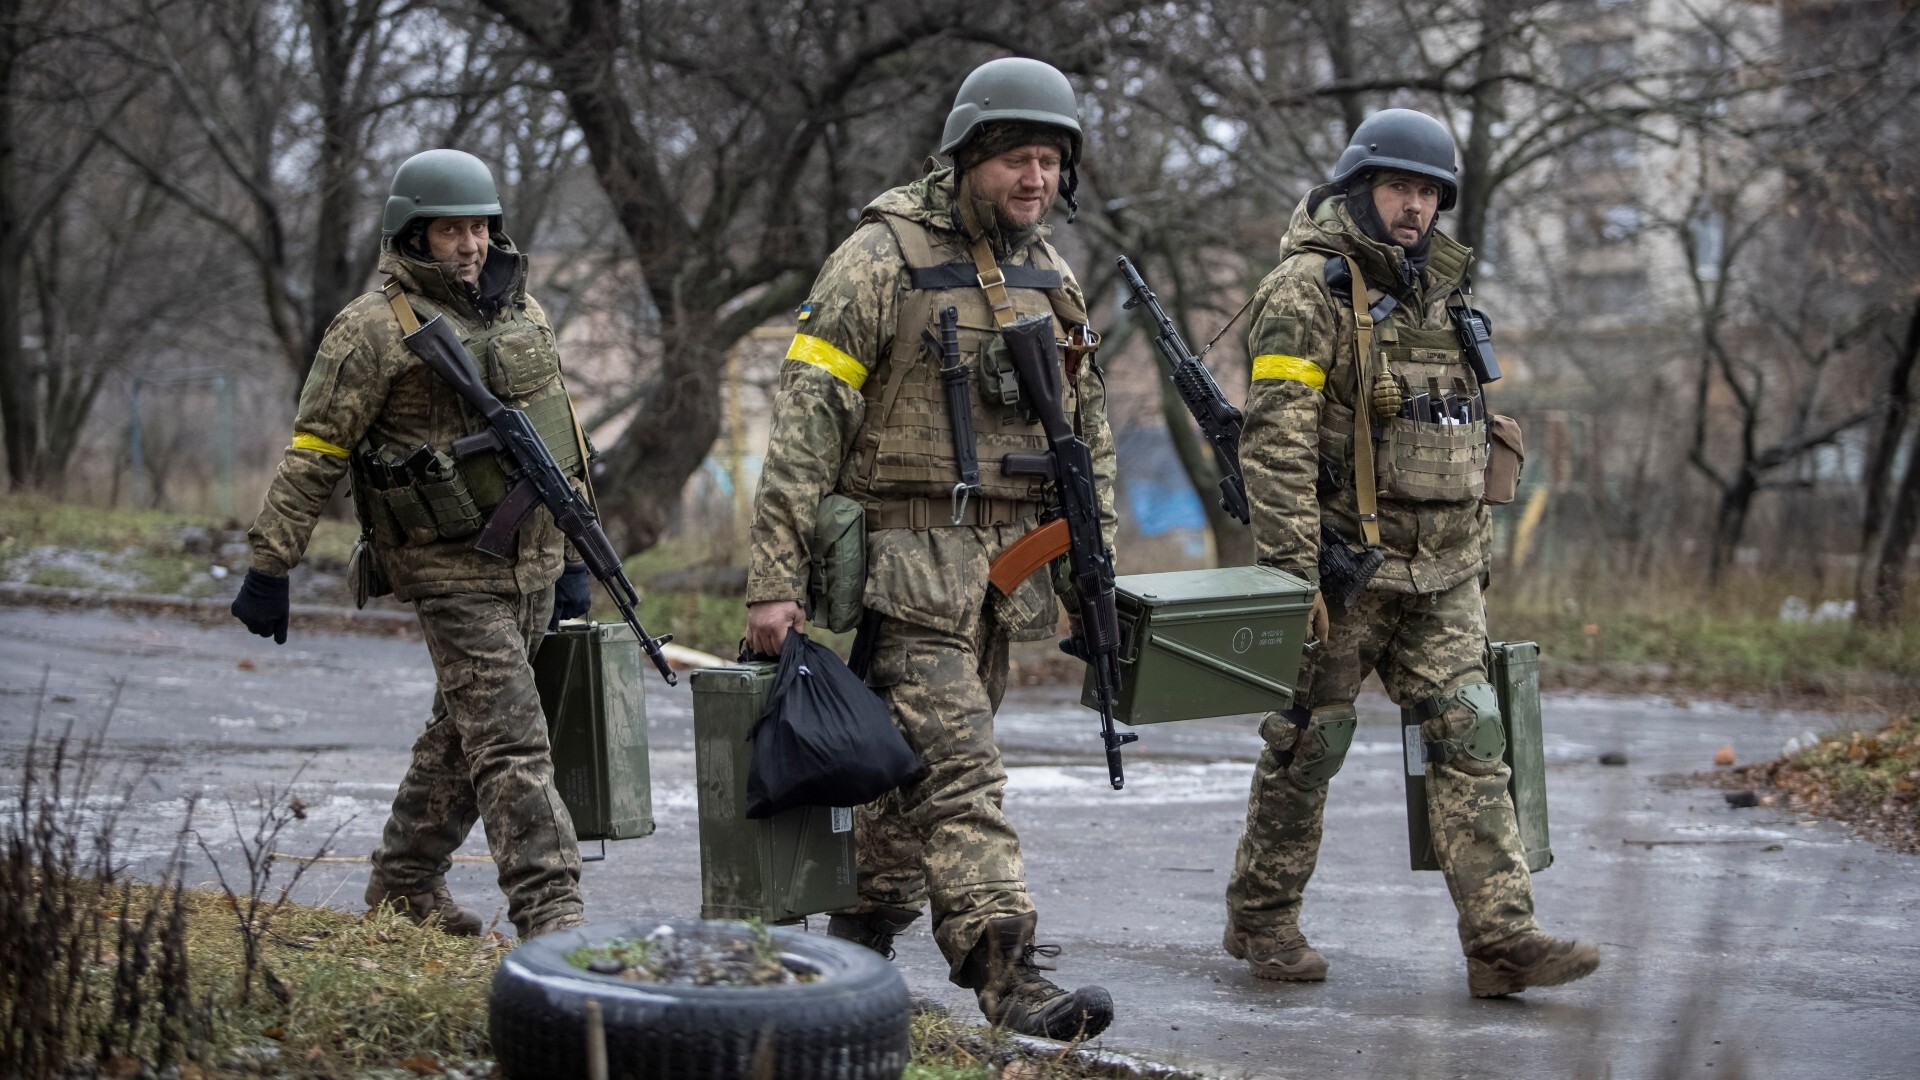 What impact will additional Western arms in Ukraine have?